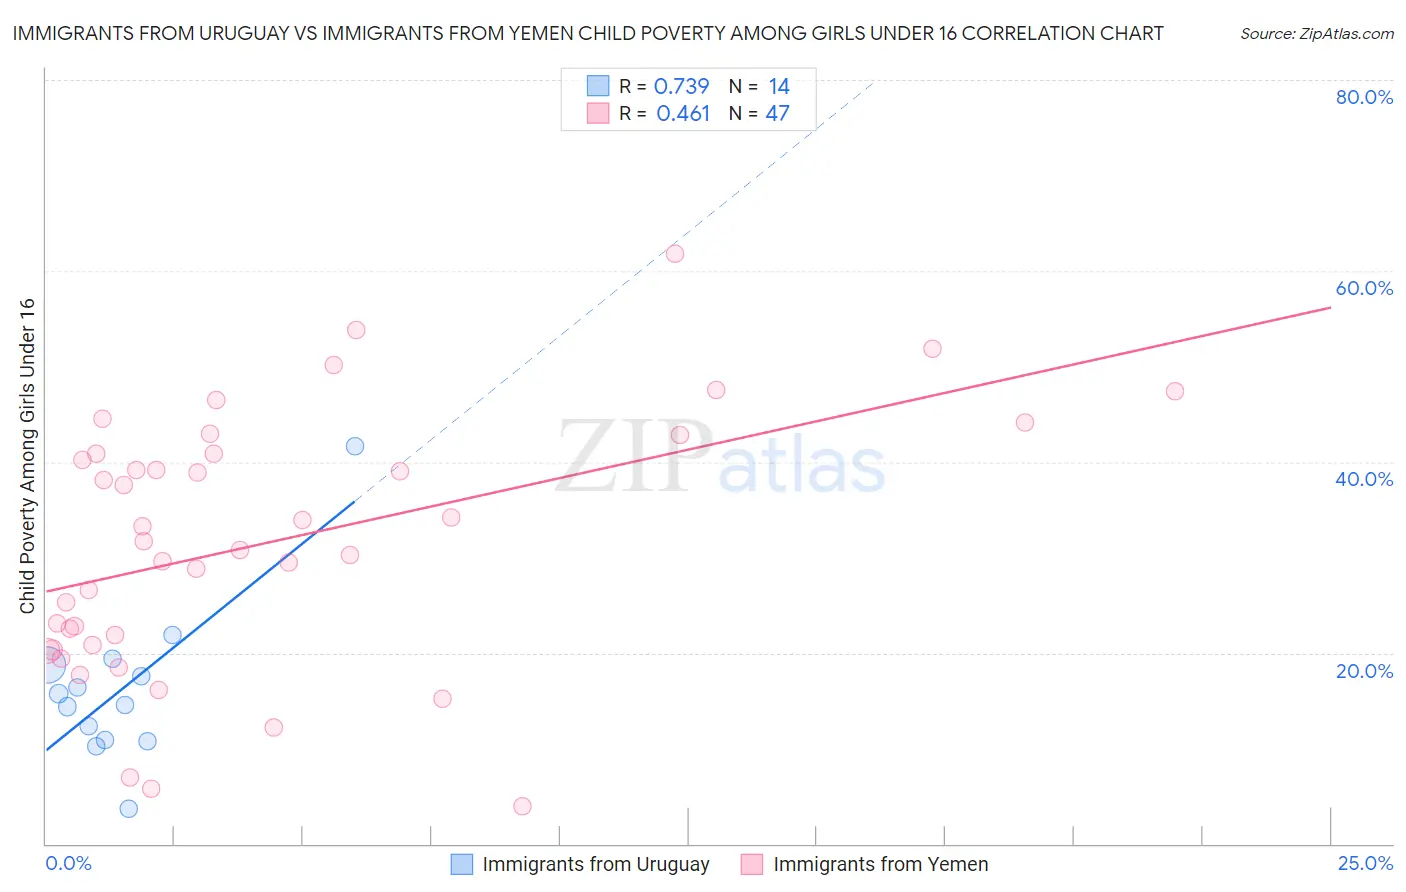 Immigrants from Uruguay vs Immigrants from Yemen Child Poverty Among Girls Under 16